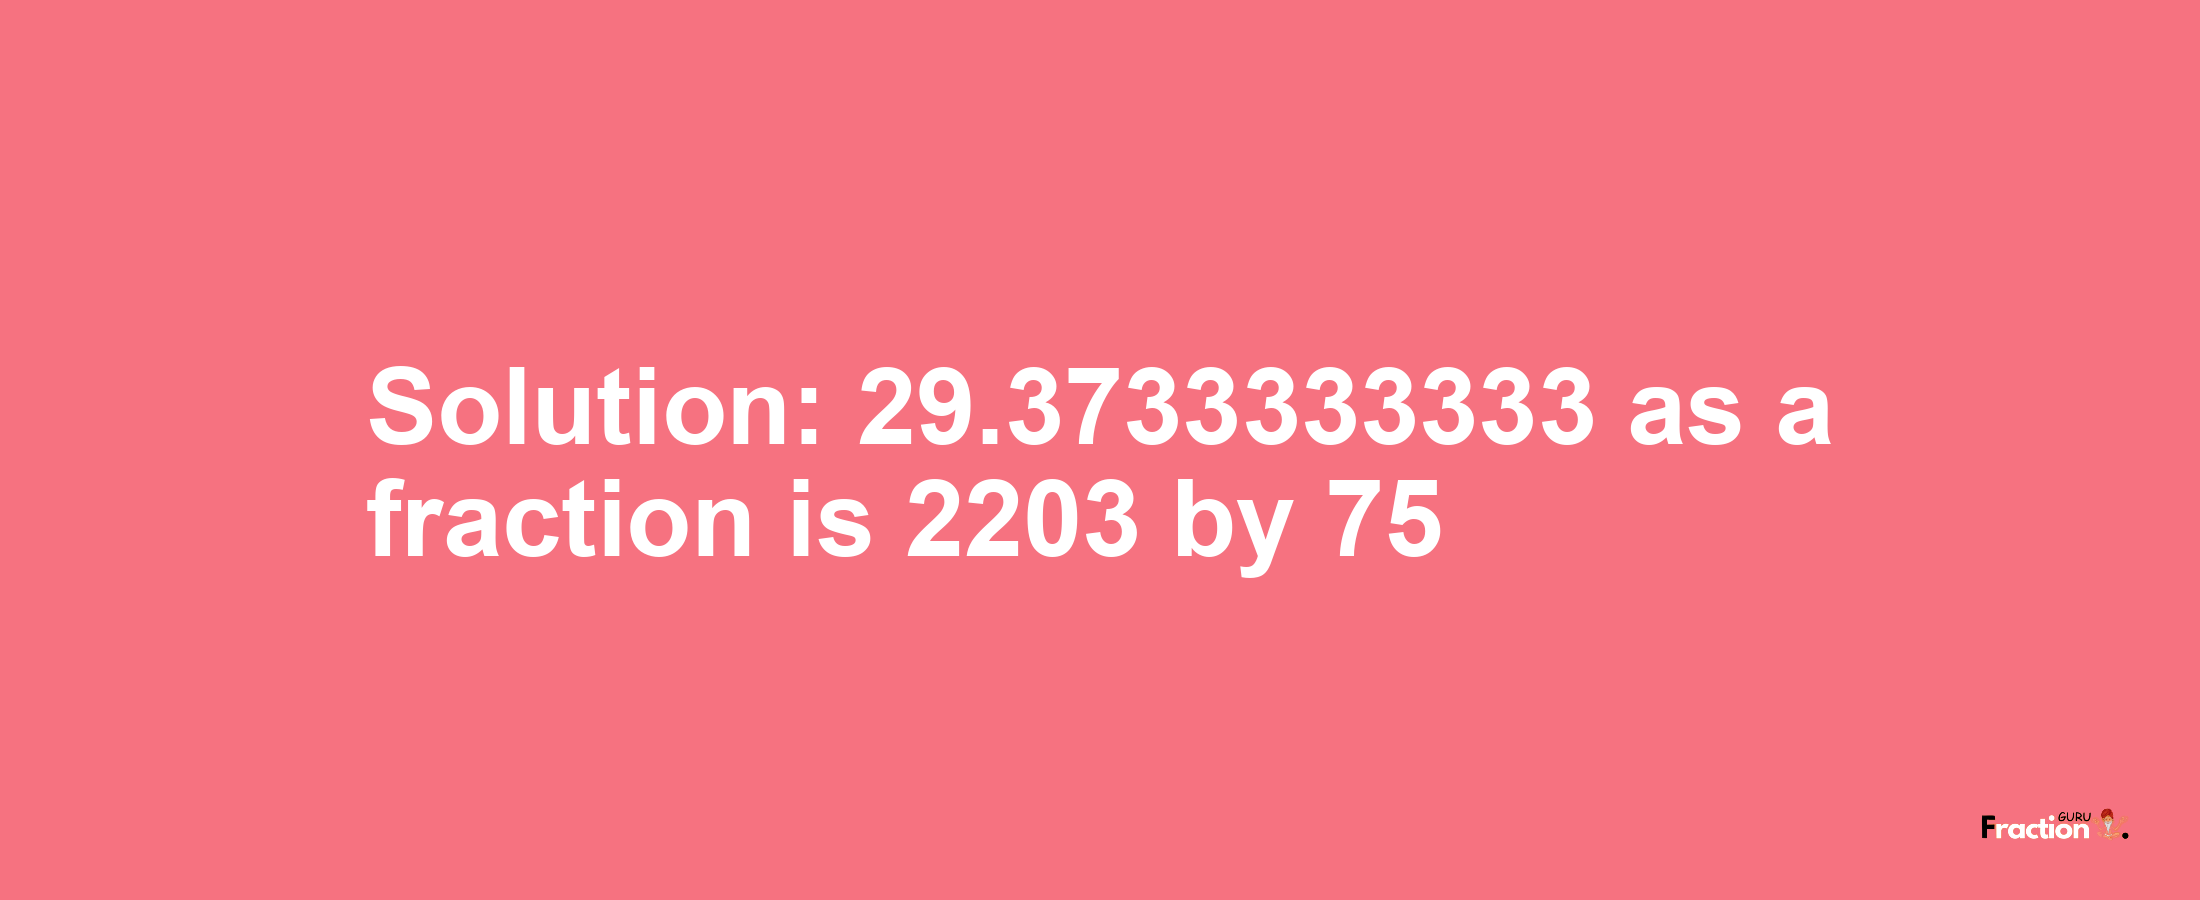 Solution:29.3733333333 as a fraction is 2203/75